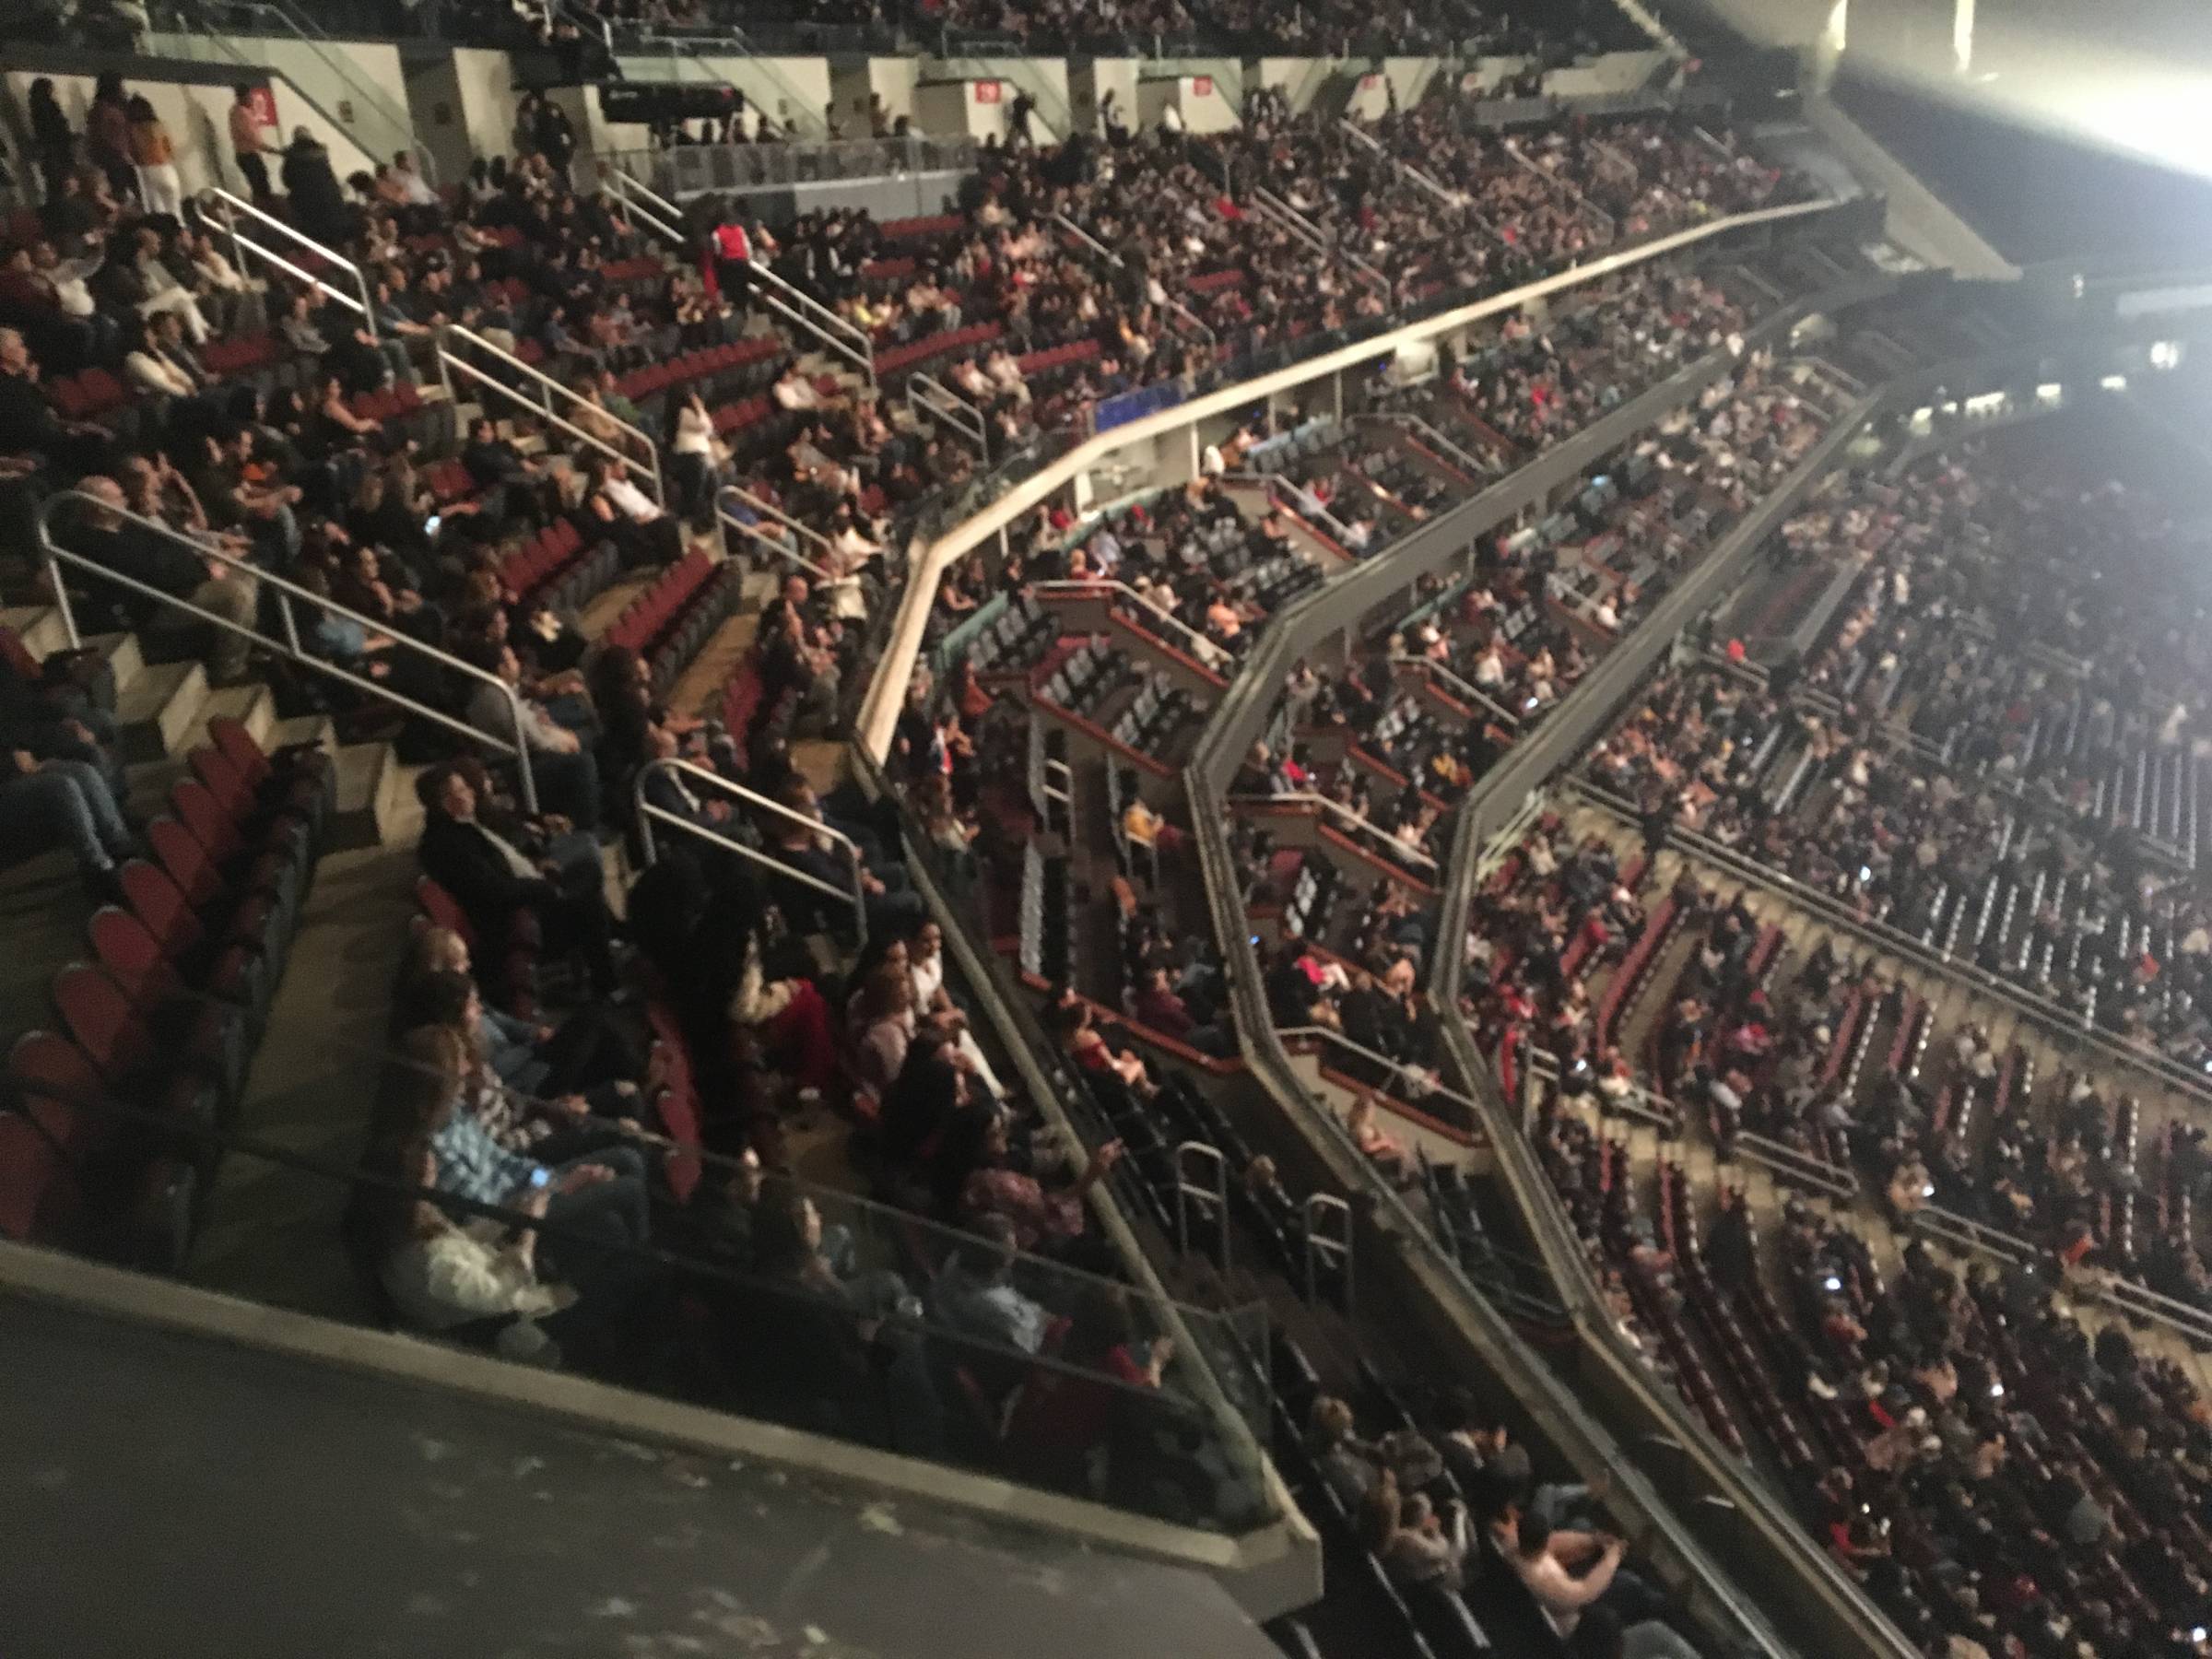 Prudential Center Seating Chart + Rows, Seat Numbers and Club